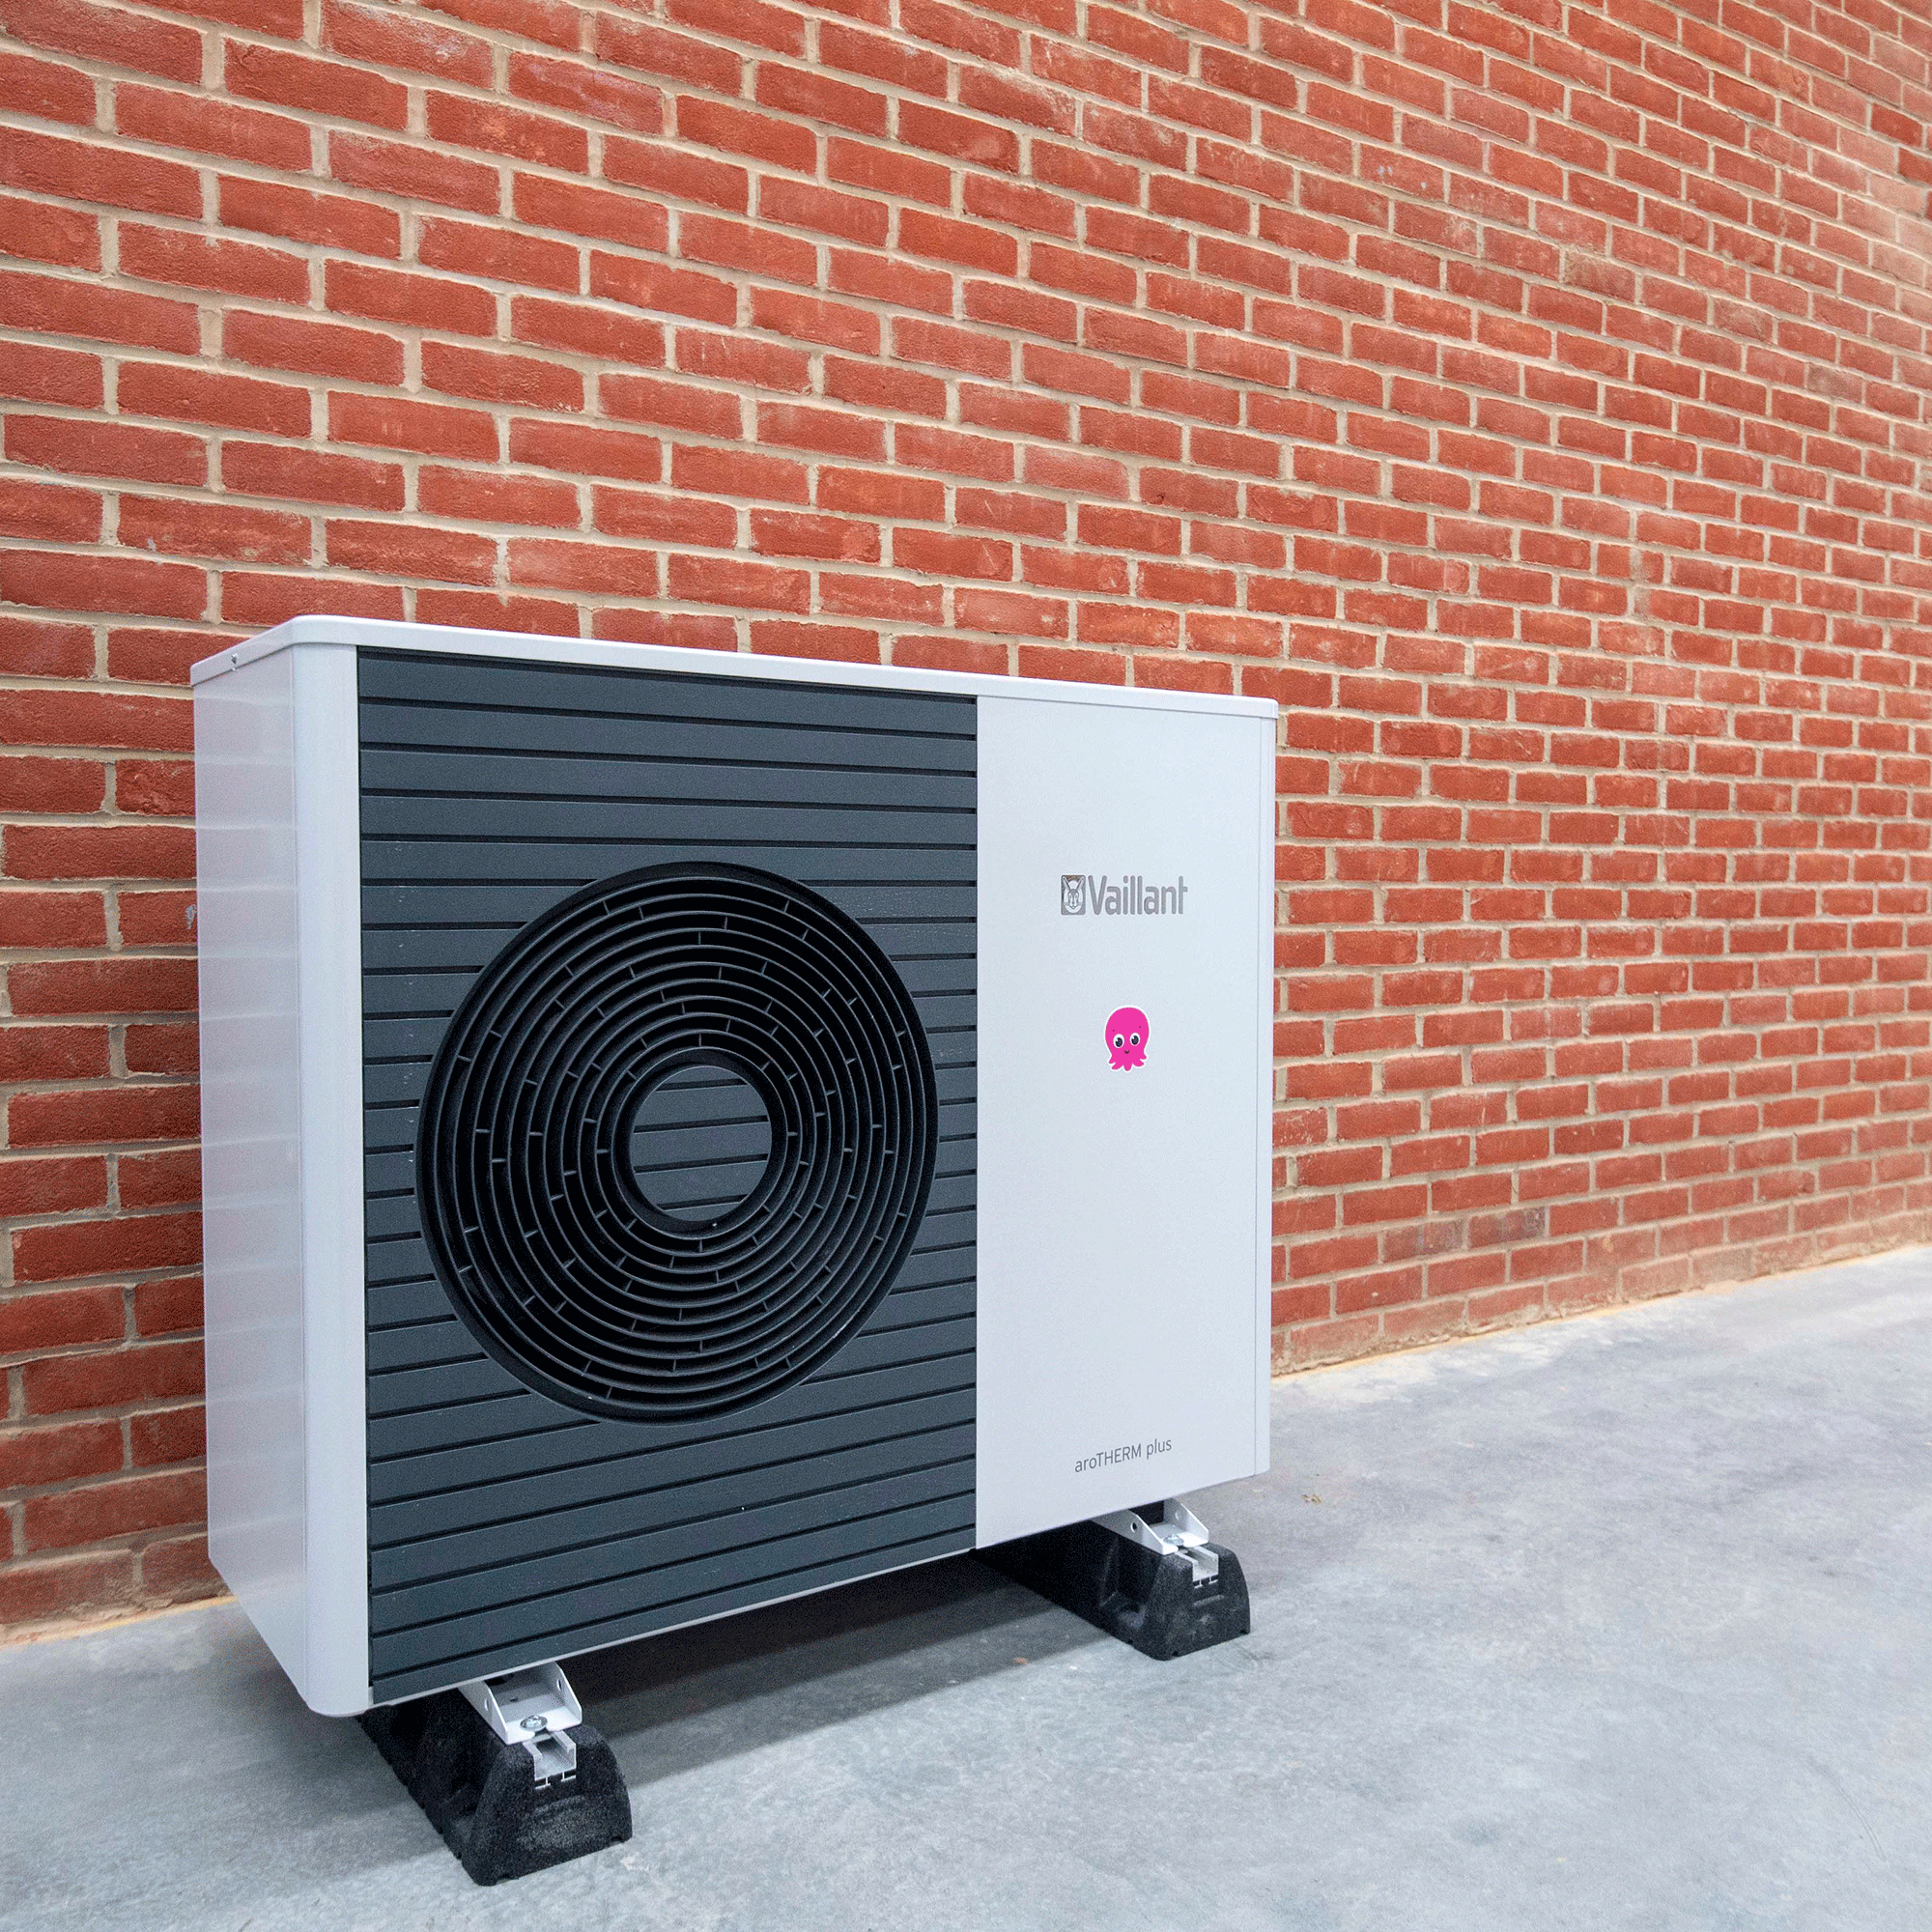 Heat source air pump out side brick wall